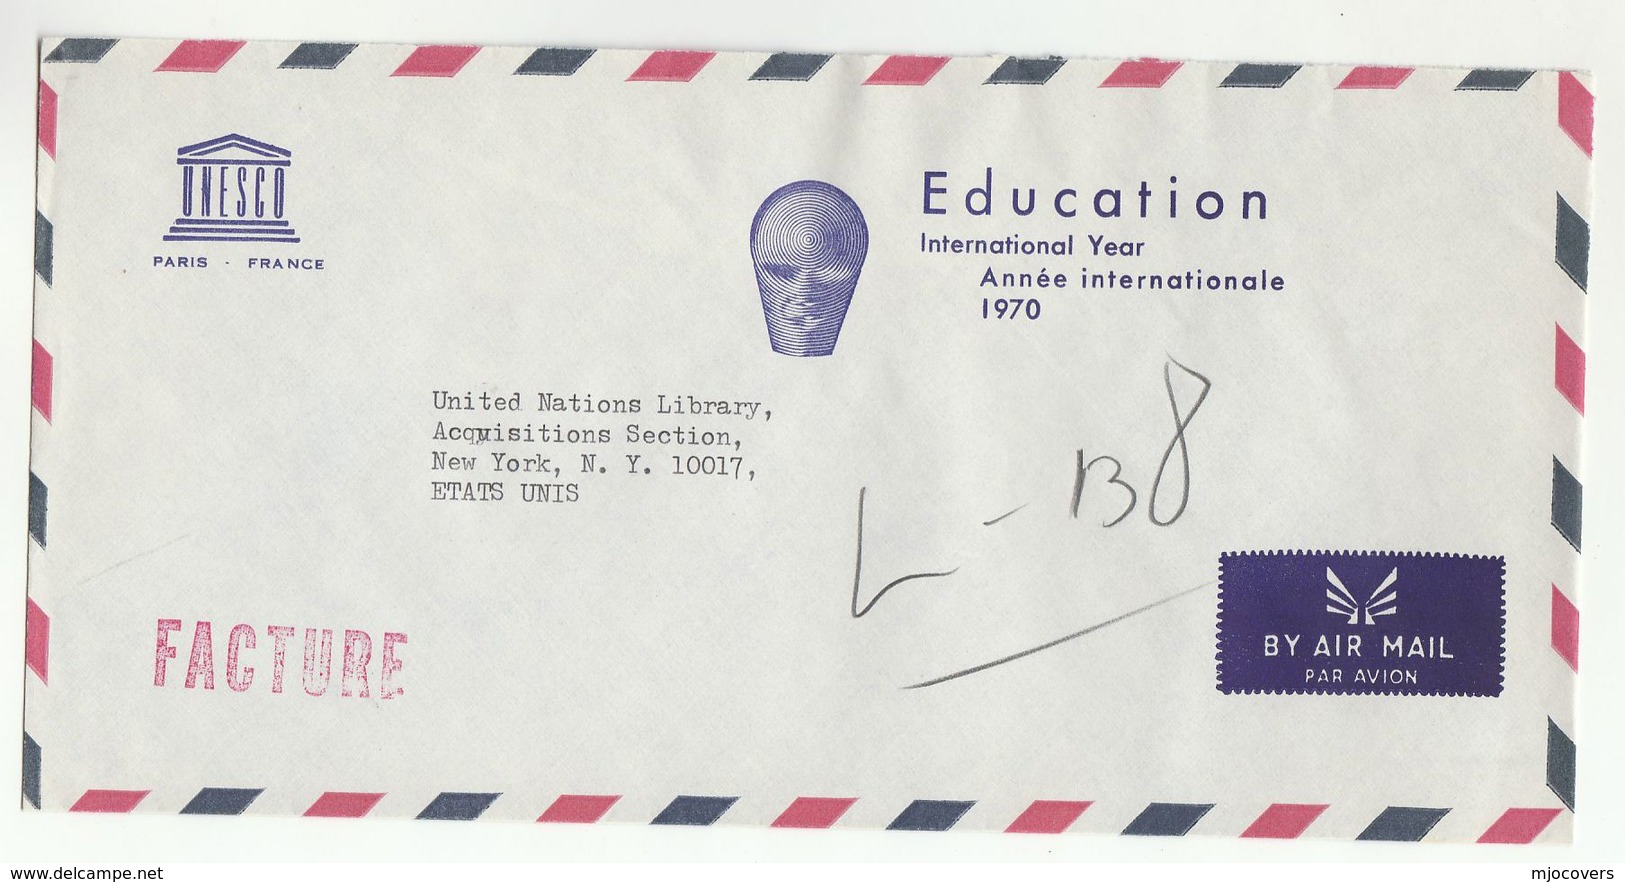 1970 UNESCO Paris COVER Illus EDUCATION YEAR France  To UN LIBRARY USA United Nations - UNESCO